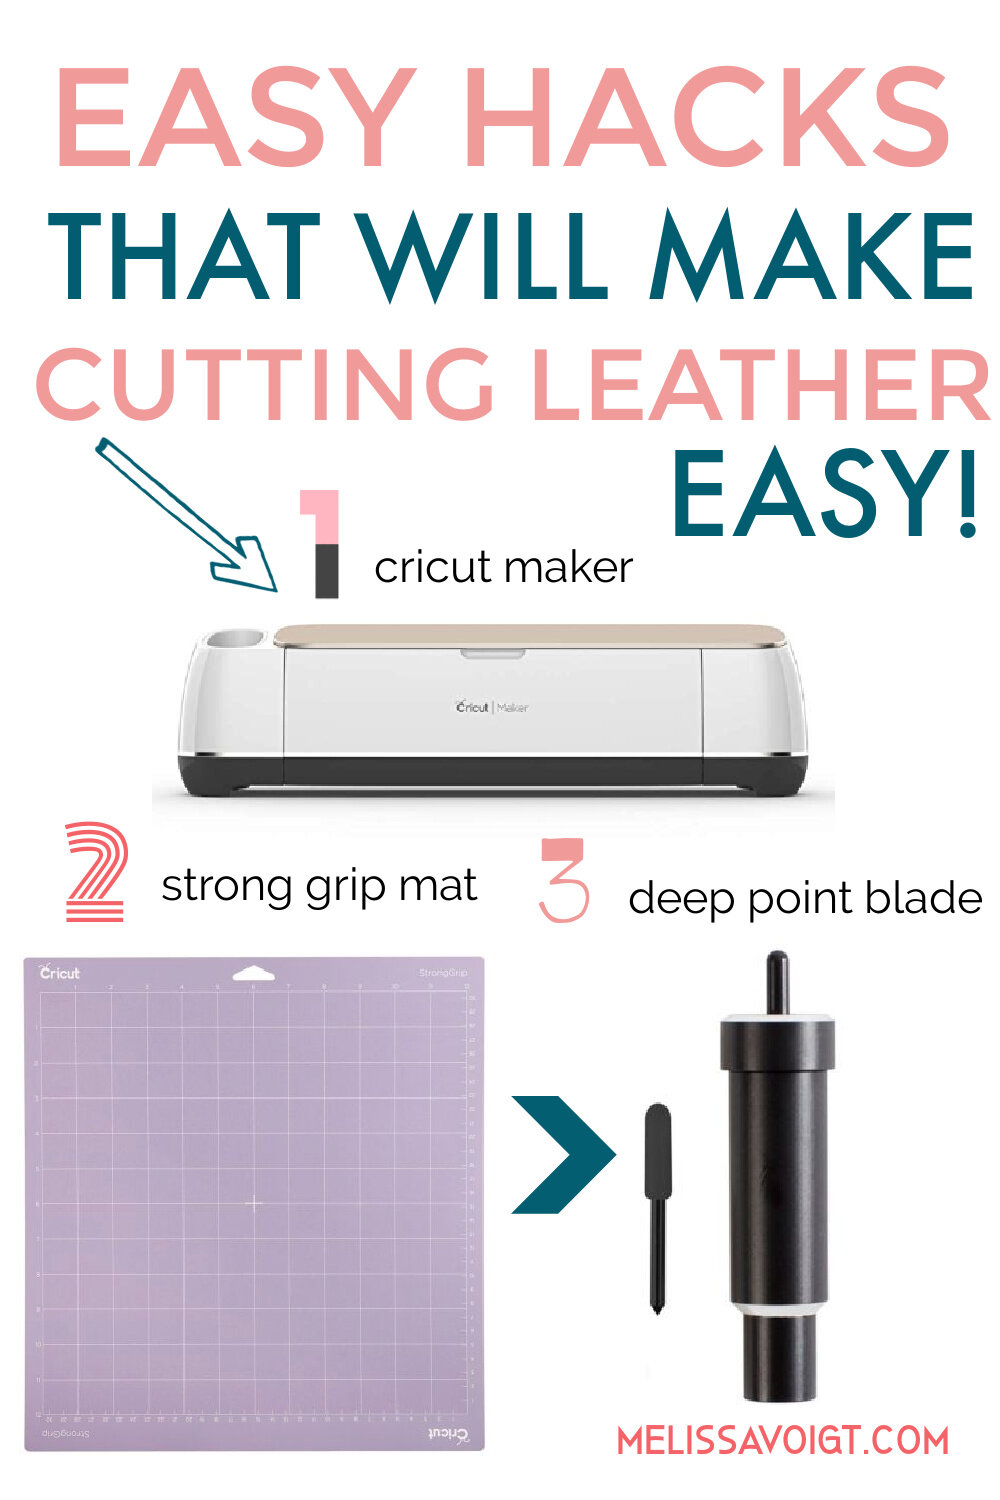 HOW TO CUT LEATHER ON YOUR CRICUT THE EASY WAY! — melissa voigt